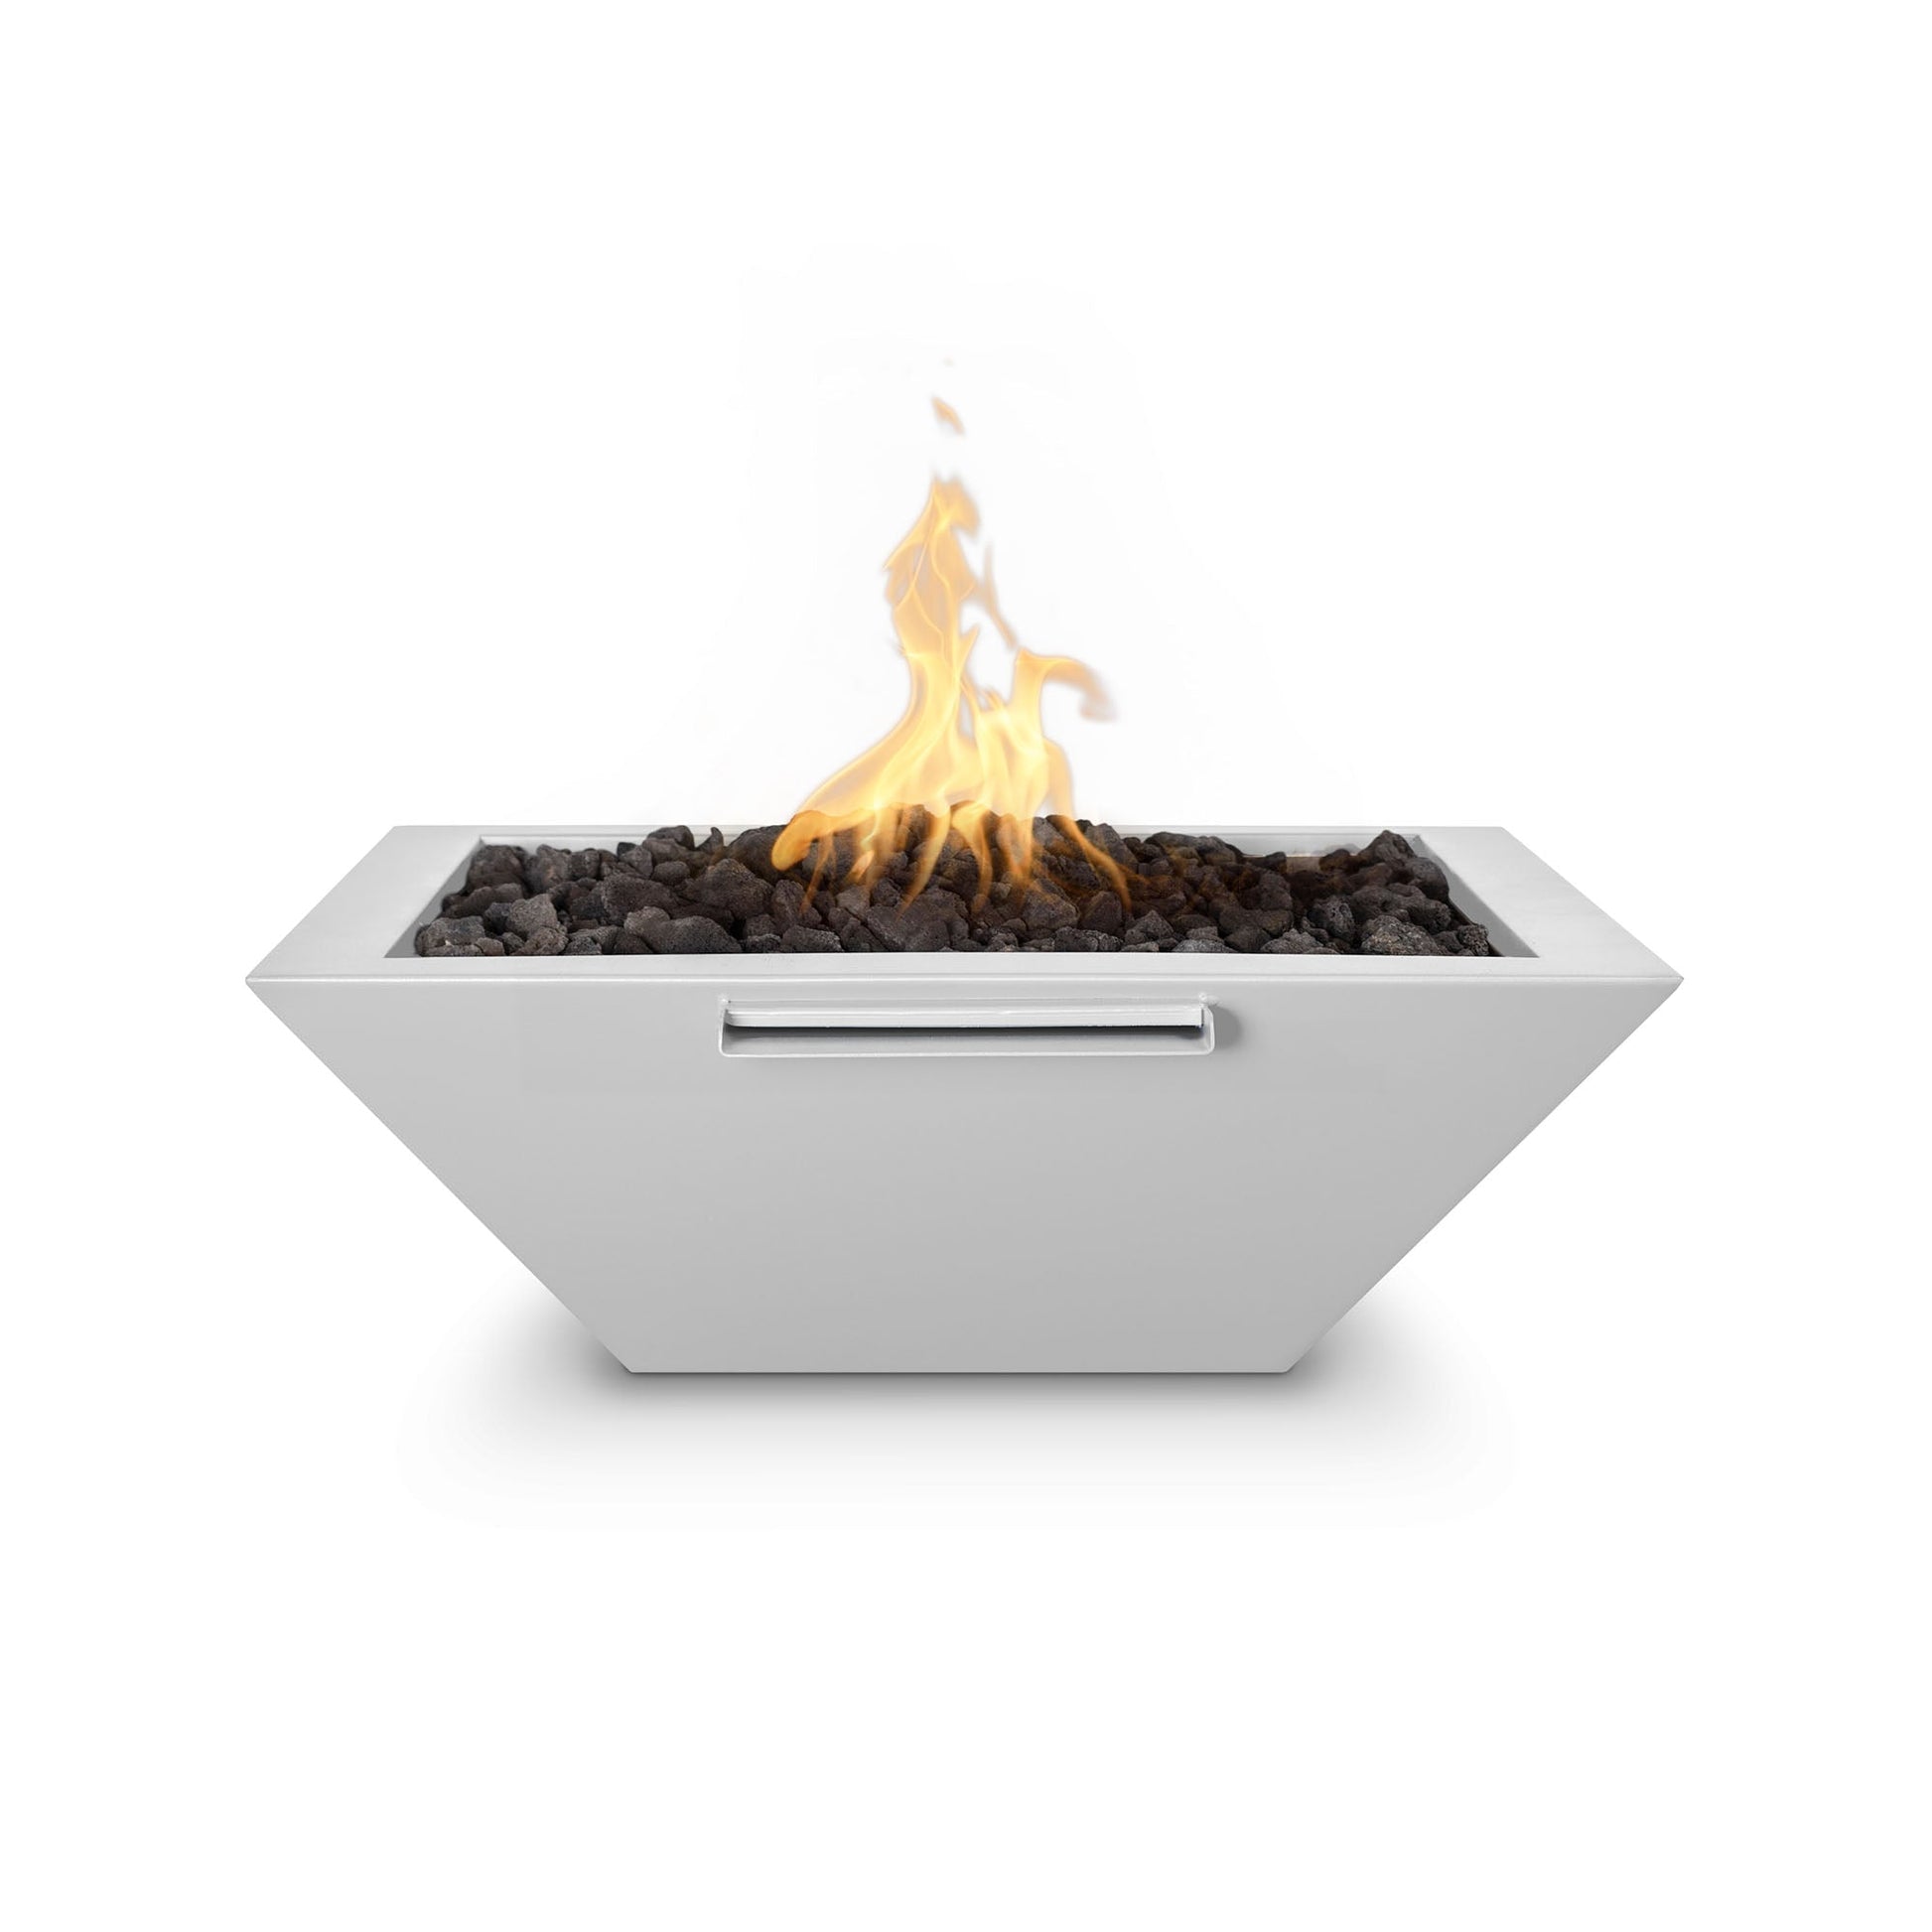 The Outdoor Plus Square Maya 30" Black Powder Coated Metal Natural Gas Fire & Water Bowl with Match Lit with Flame Sense Ignition